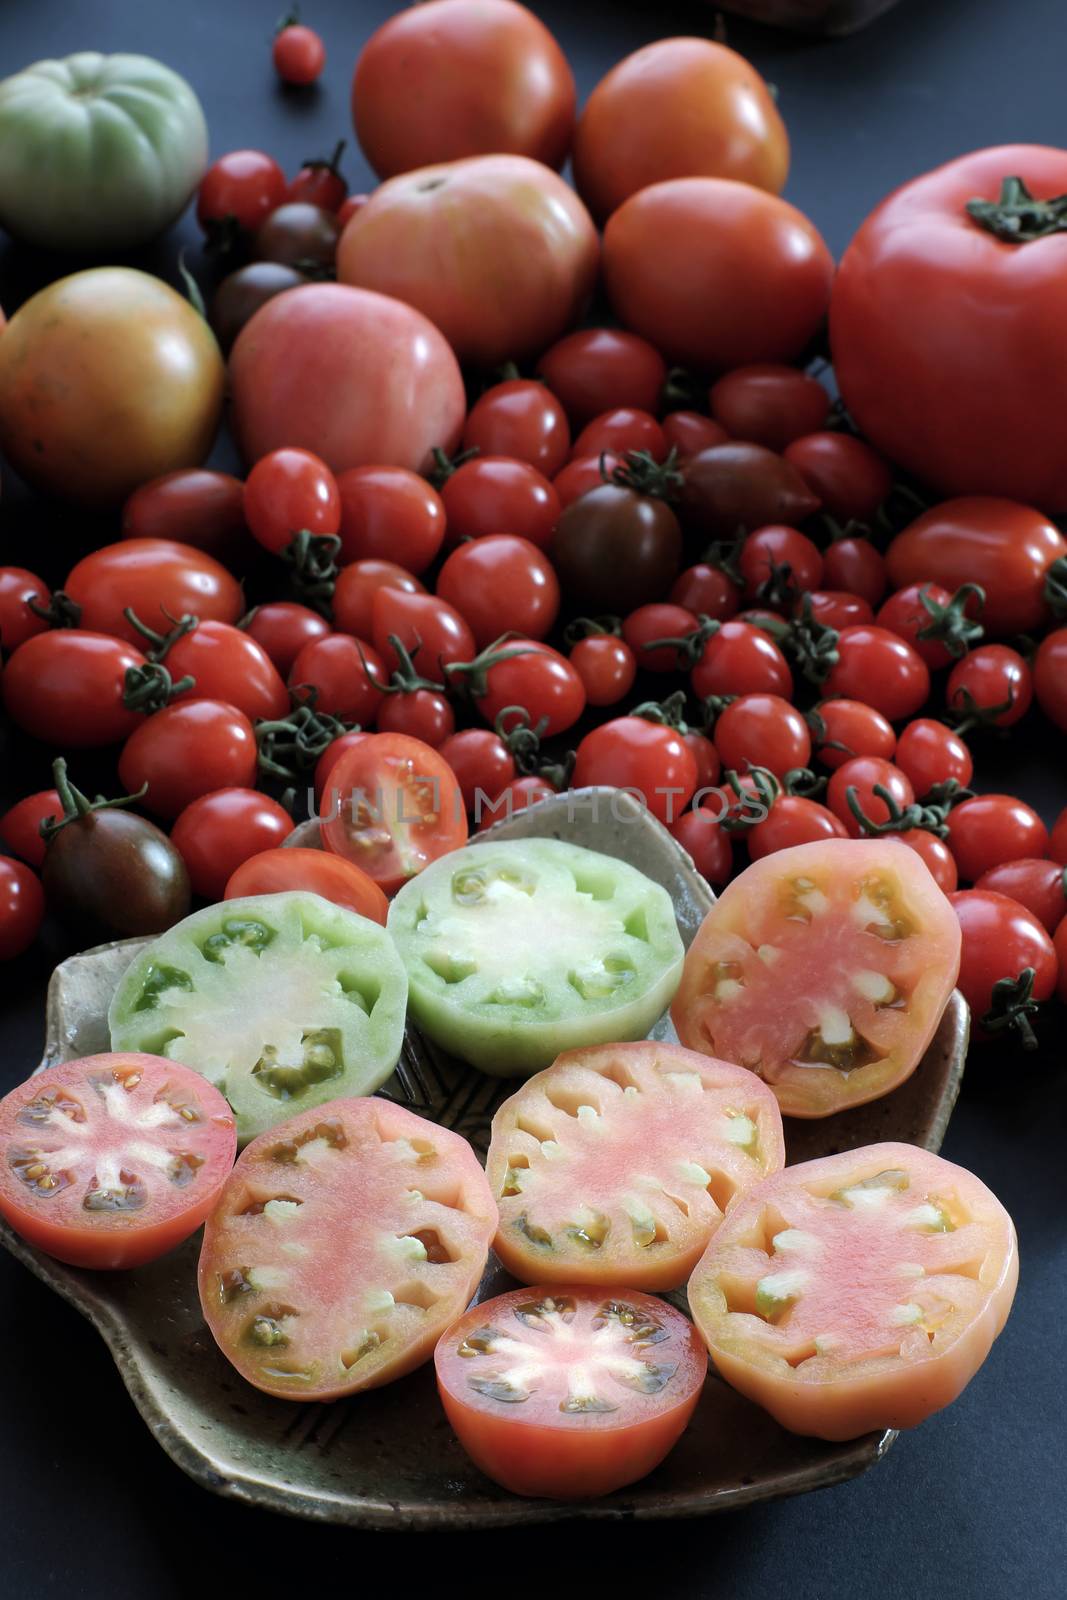 Collect of tomatoes, a popular and cheap food with many uses as antioxidants, skin care, anticancer, good for alzheimer people, this vegetable rich vitamin a, vitamin c, fiber, carotenoids, lycopene